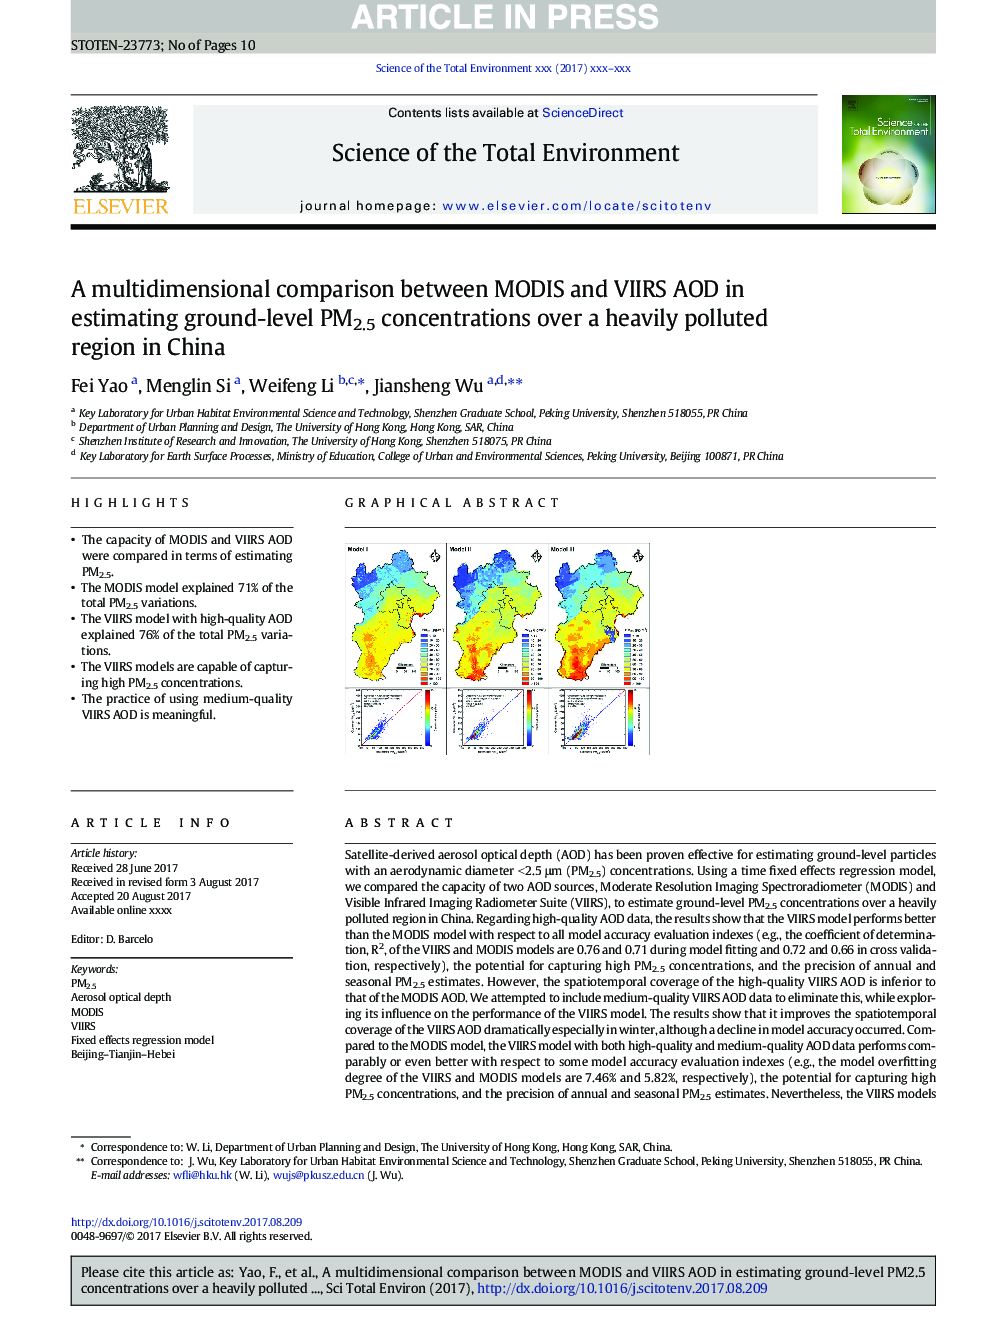 A multidimensional comparison between MODIS and VIIRS AOD in estimating ground-level PM2.5 concentrations over a heavily polluted region in China